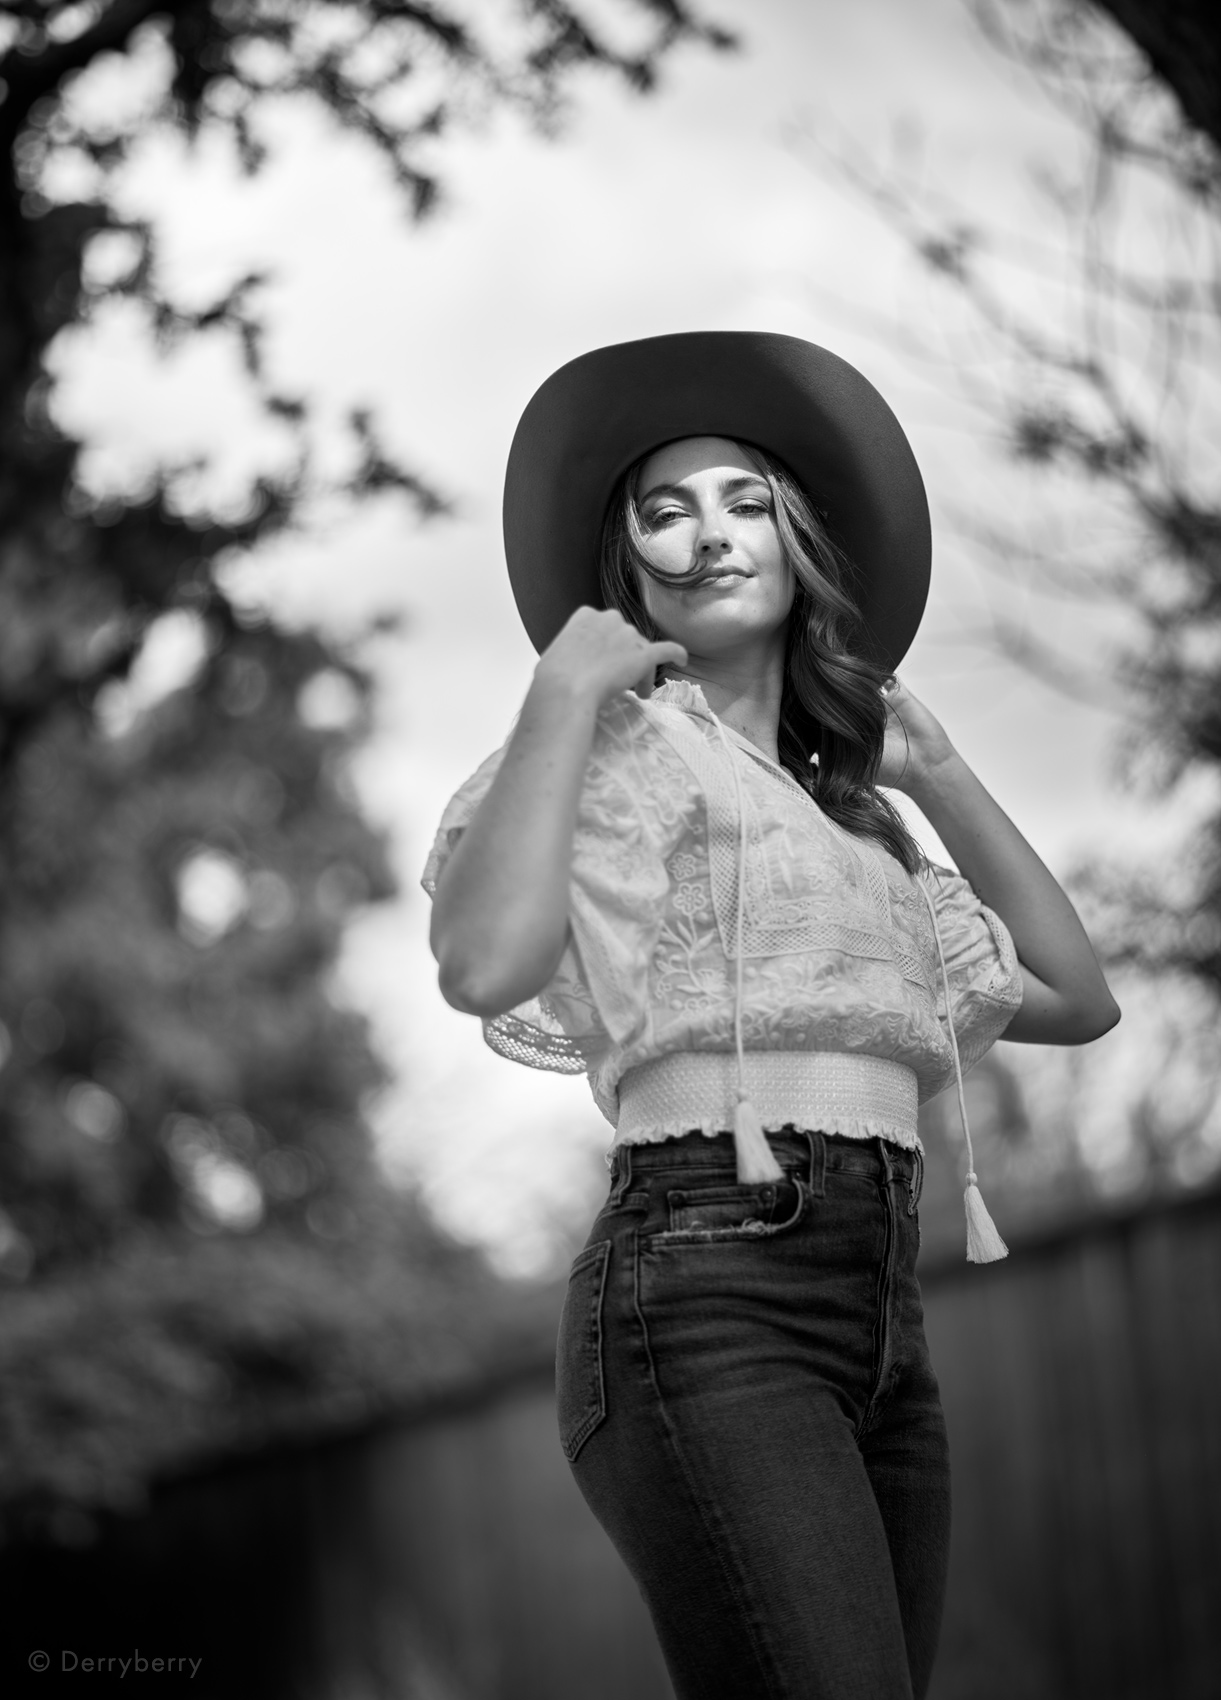 Senior picture in B&W  of young woman in cowboy hat and blue jeans outdoors